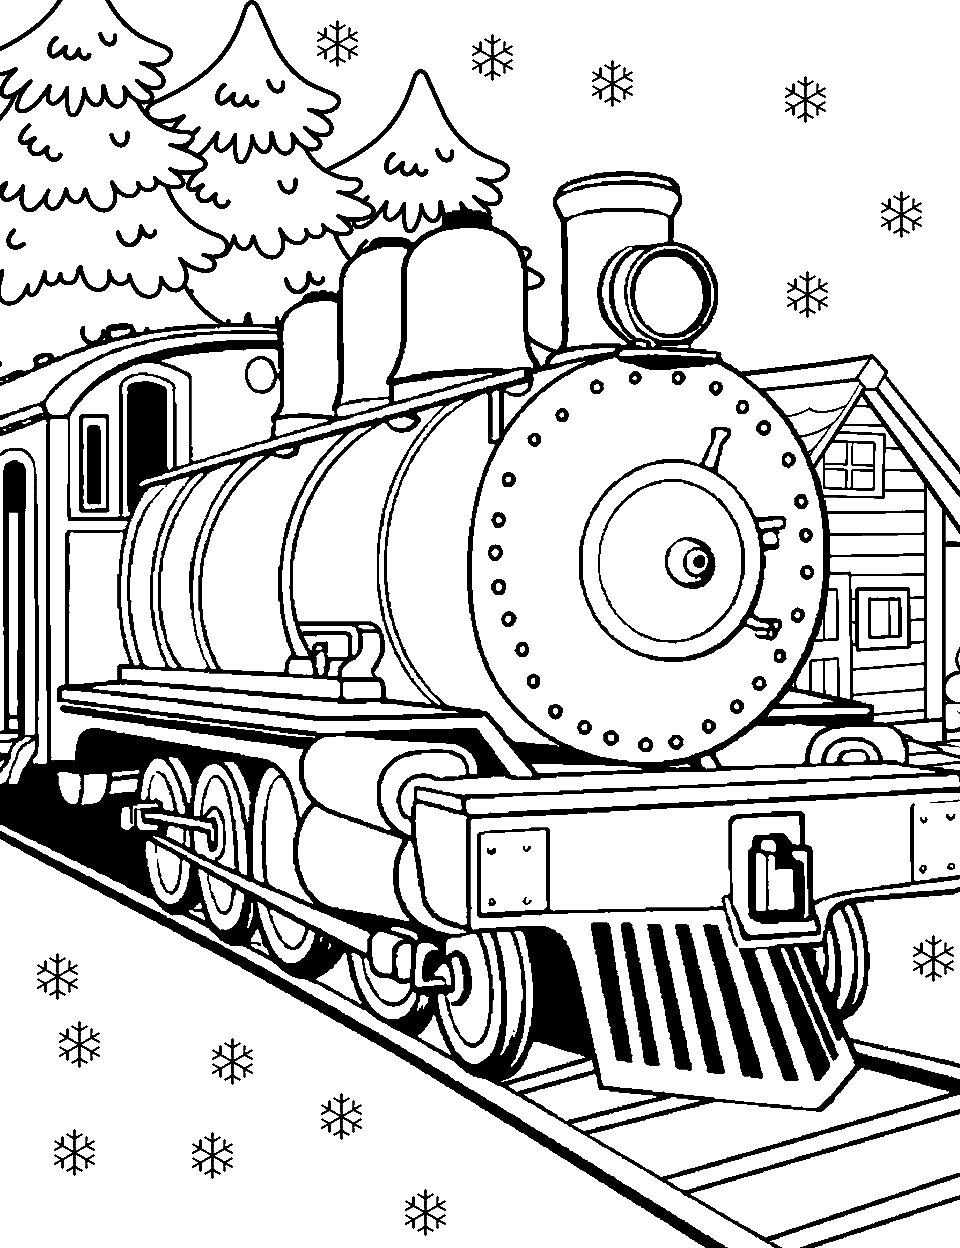 Train in a Winter Village Coloring Page - A quaint train passing through a snowy village.